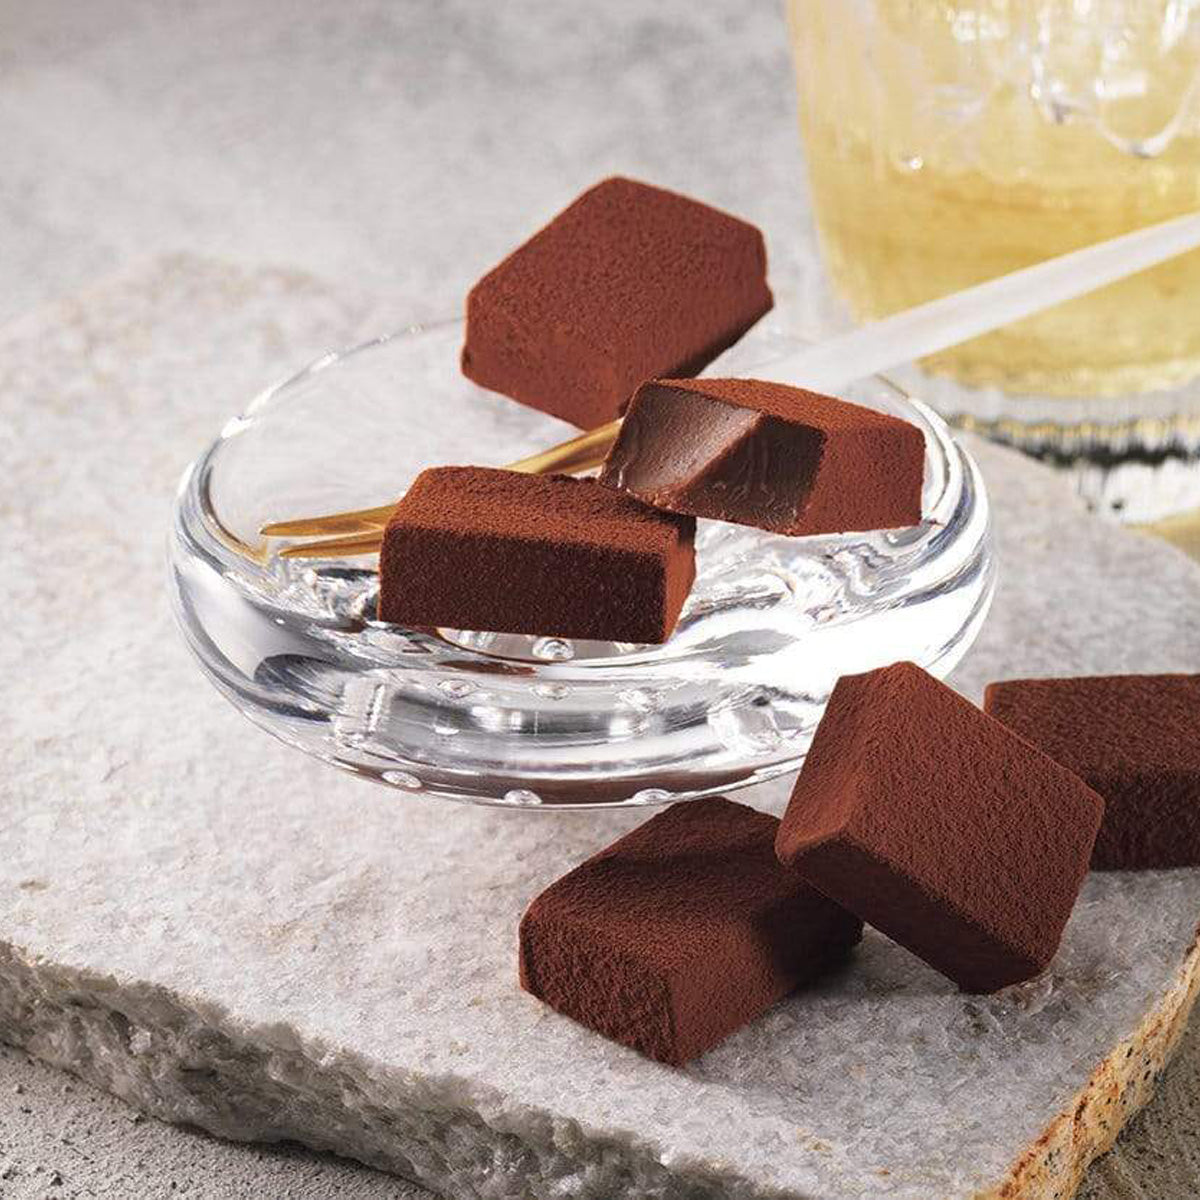 ROYCE' Chocolate - Nama Chocolate "Islay Whisky (Port Charlotte)" - Image shows brown blocks of chocolates on a clear plate and gray stone platform. Accents include a wooden stick and gray background shows a blurred picture of a glass with light yellow whisky.